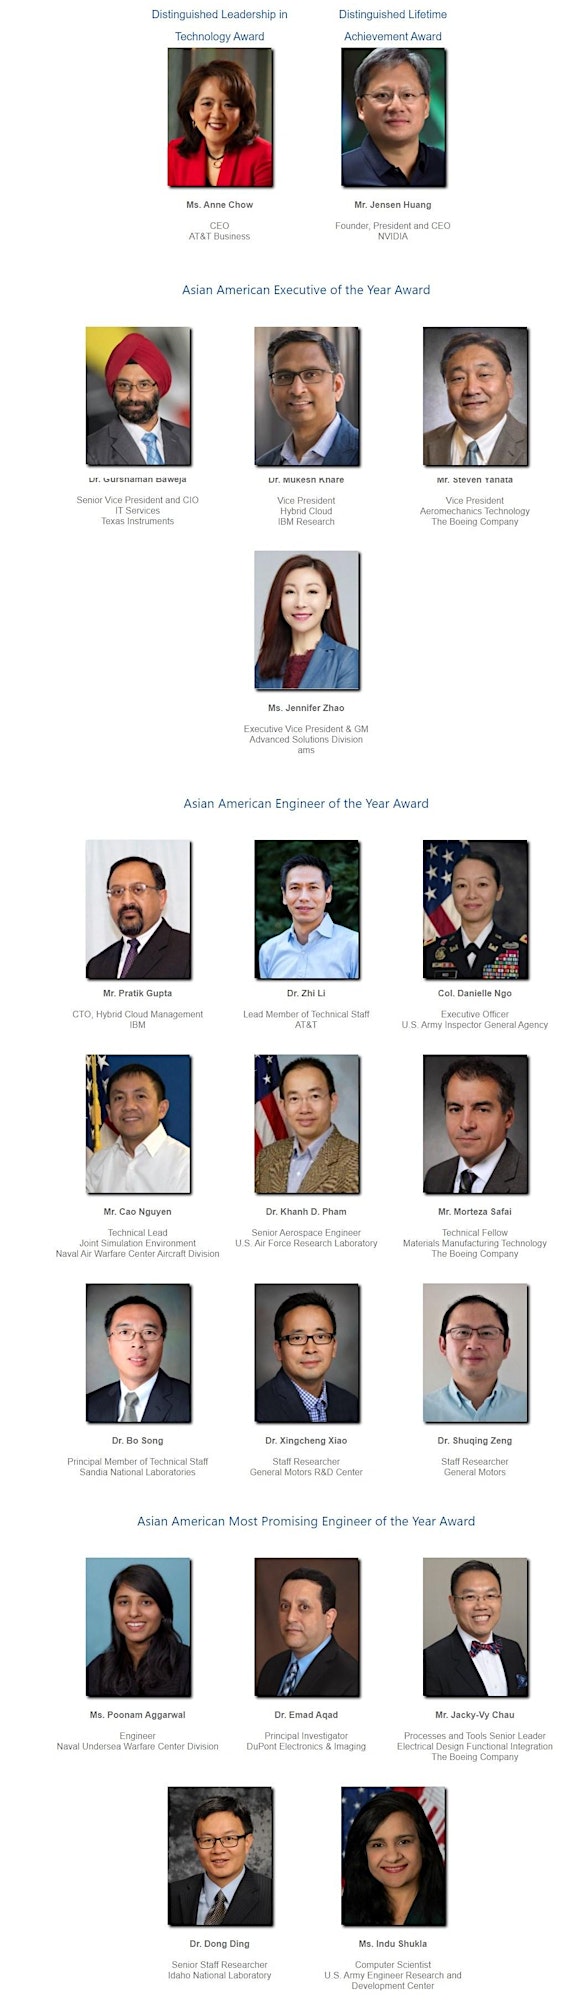 2020-2021 Asian American Engineer of the Award Ceremony (Access code:AAEOY) image